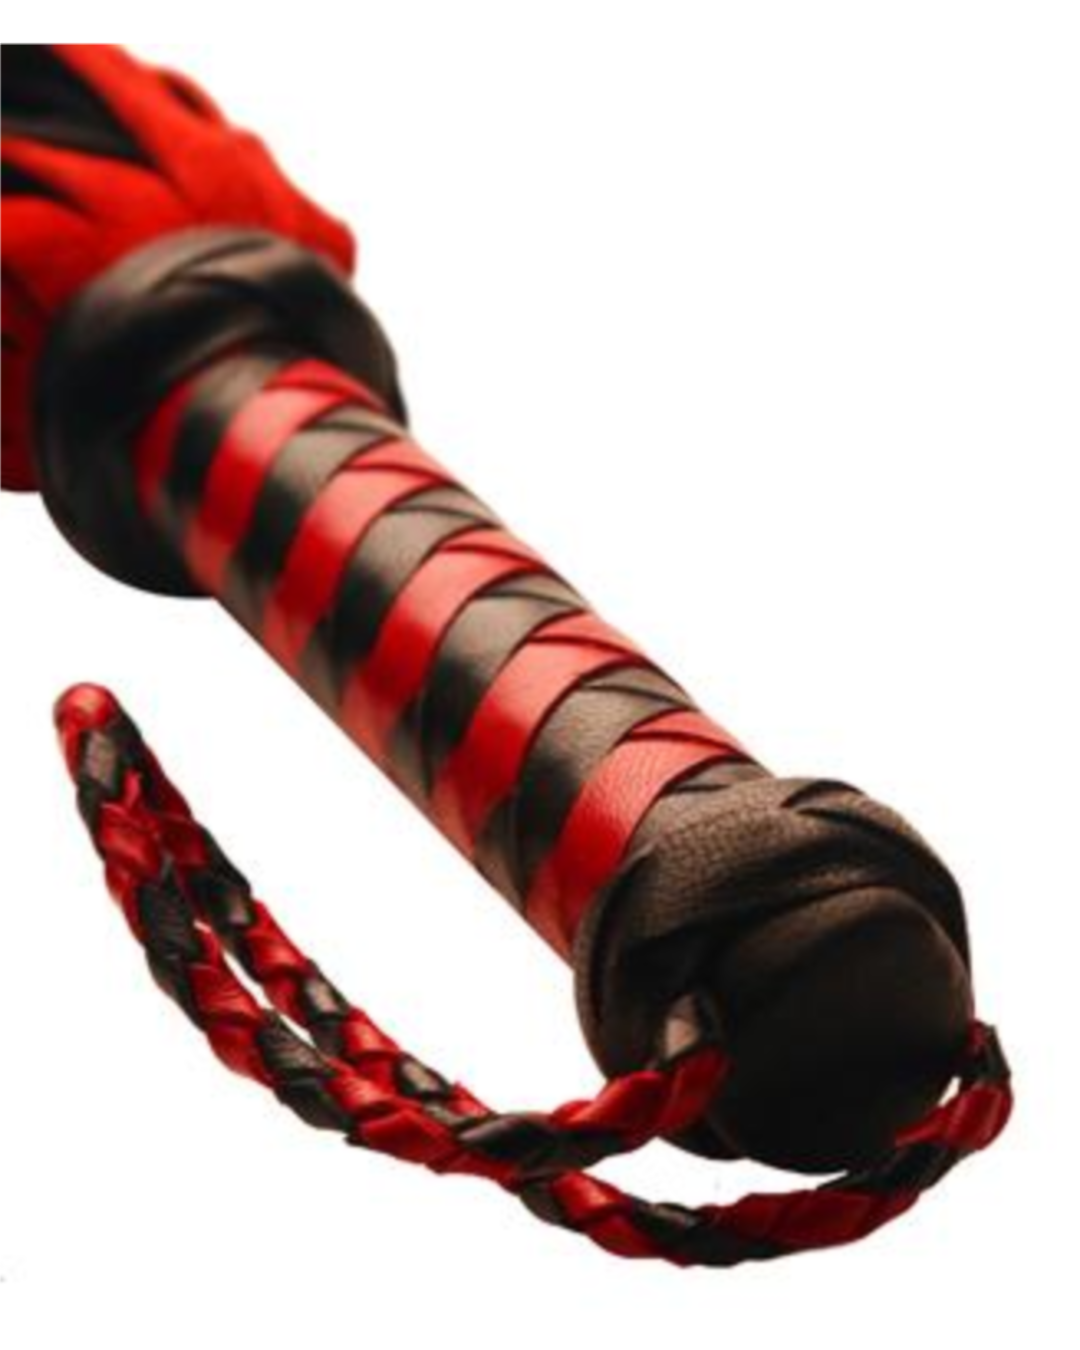 Short Suede Black and Red Flogger by XR Brands handle